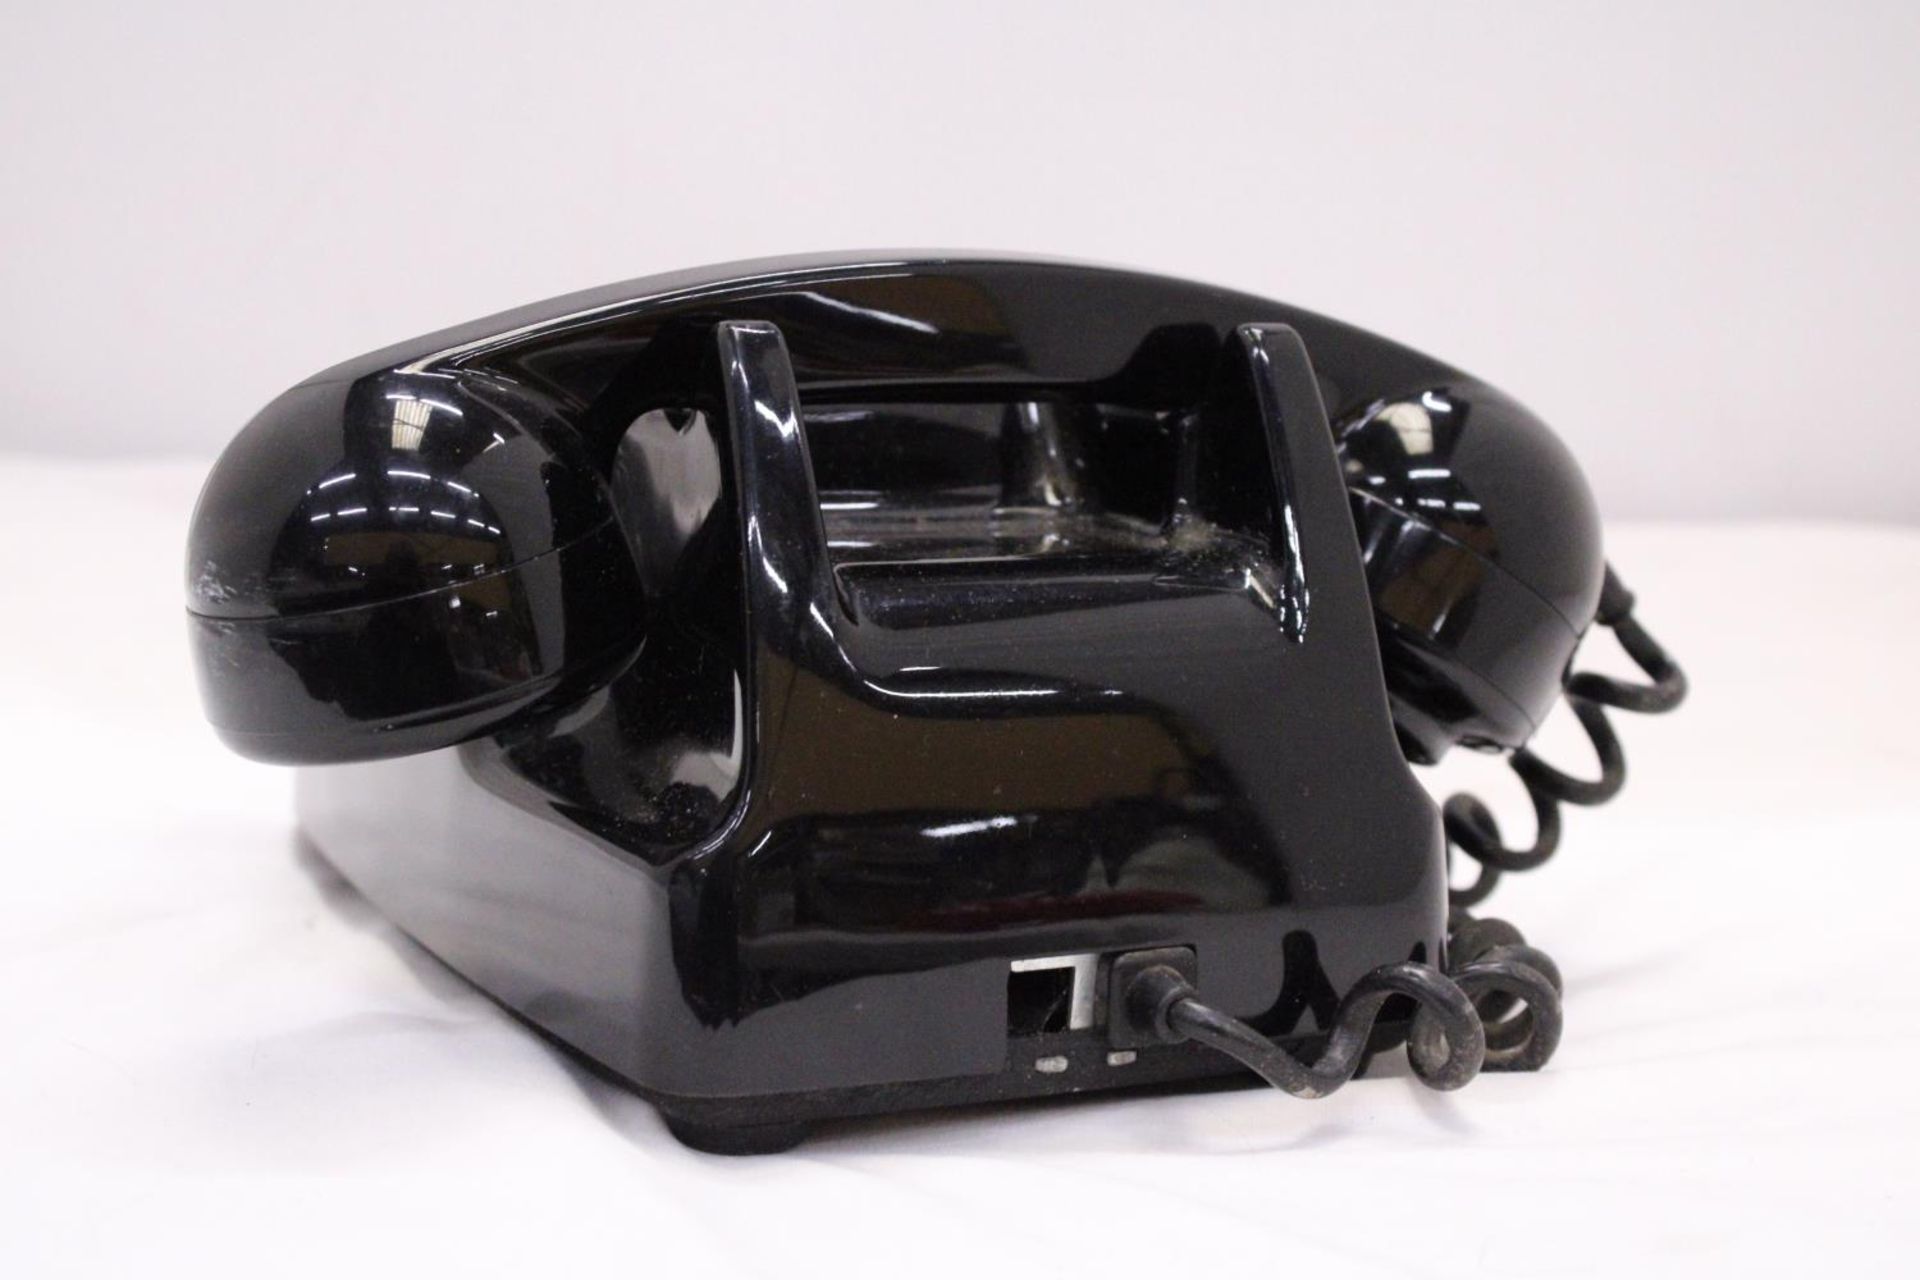 A VINTAGE BLACK TELEPHONE WITH DIAL - Image 5 of 6